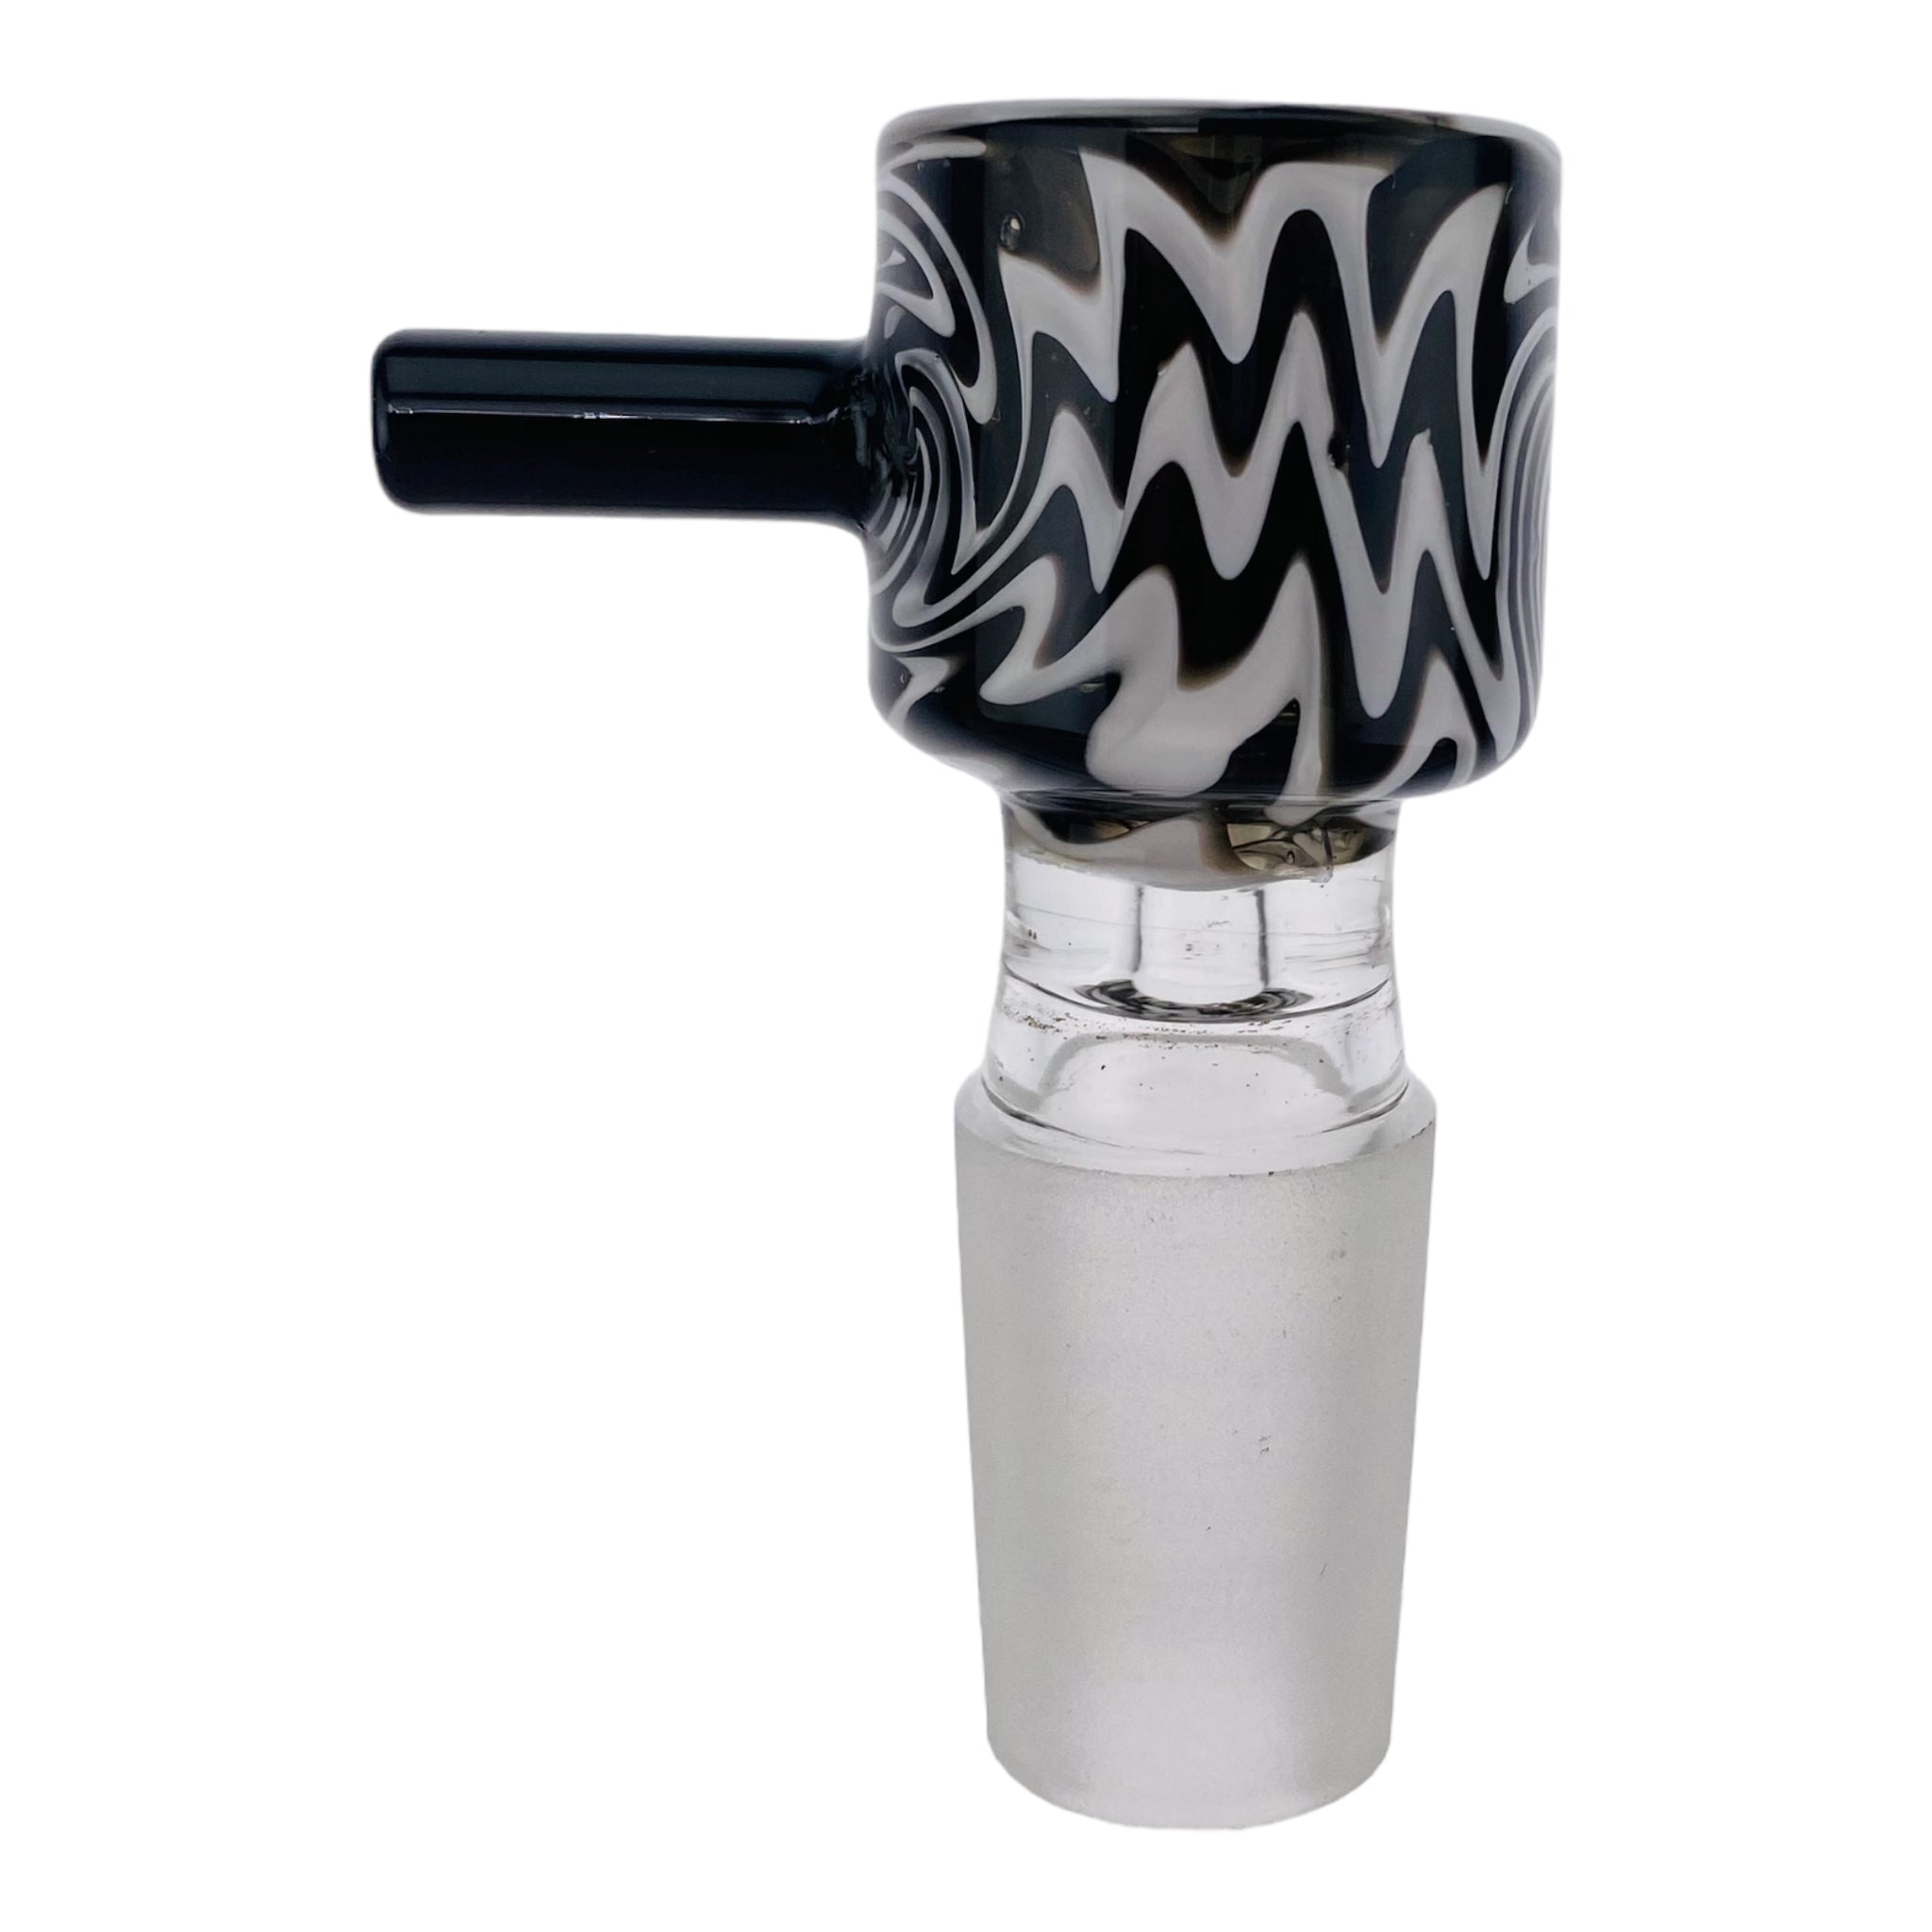 18mm Flower Bowl - Black And White Cylinder Straight Wall Bong Bowl Piece